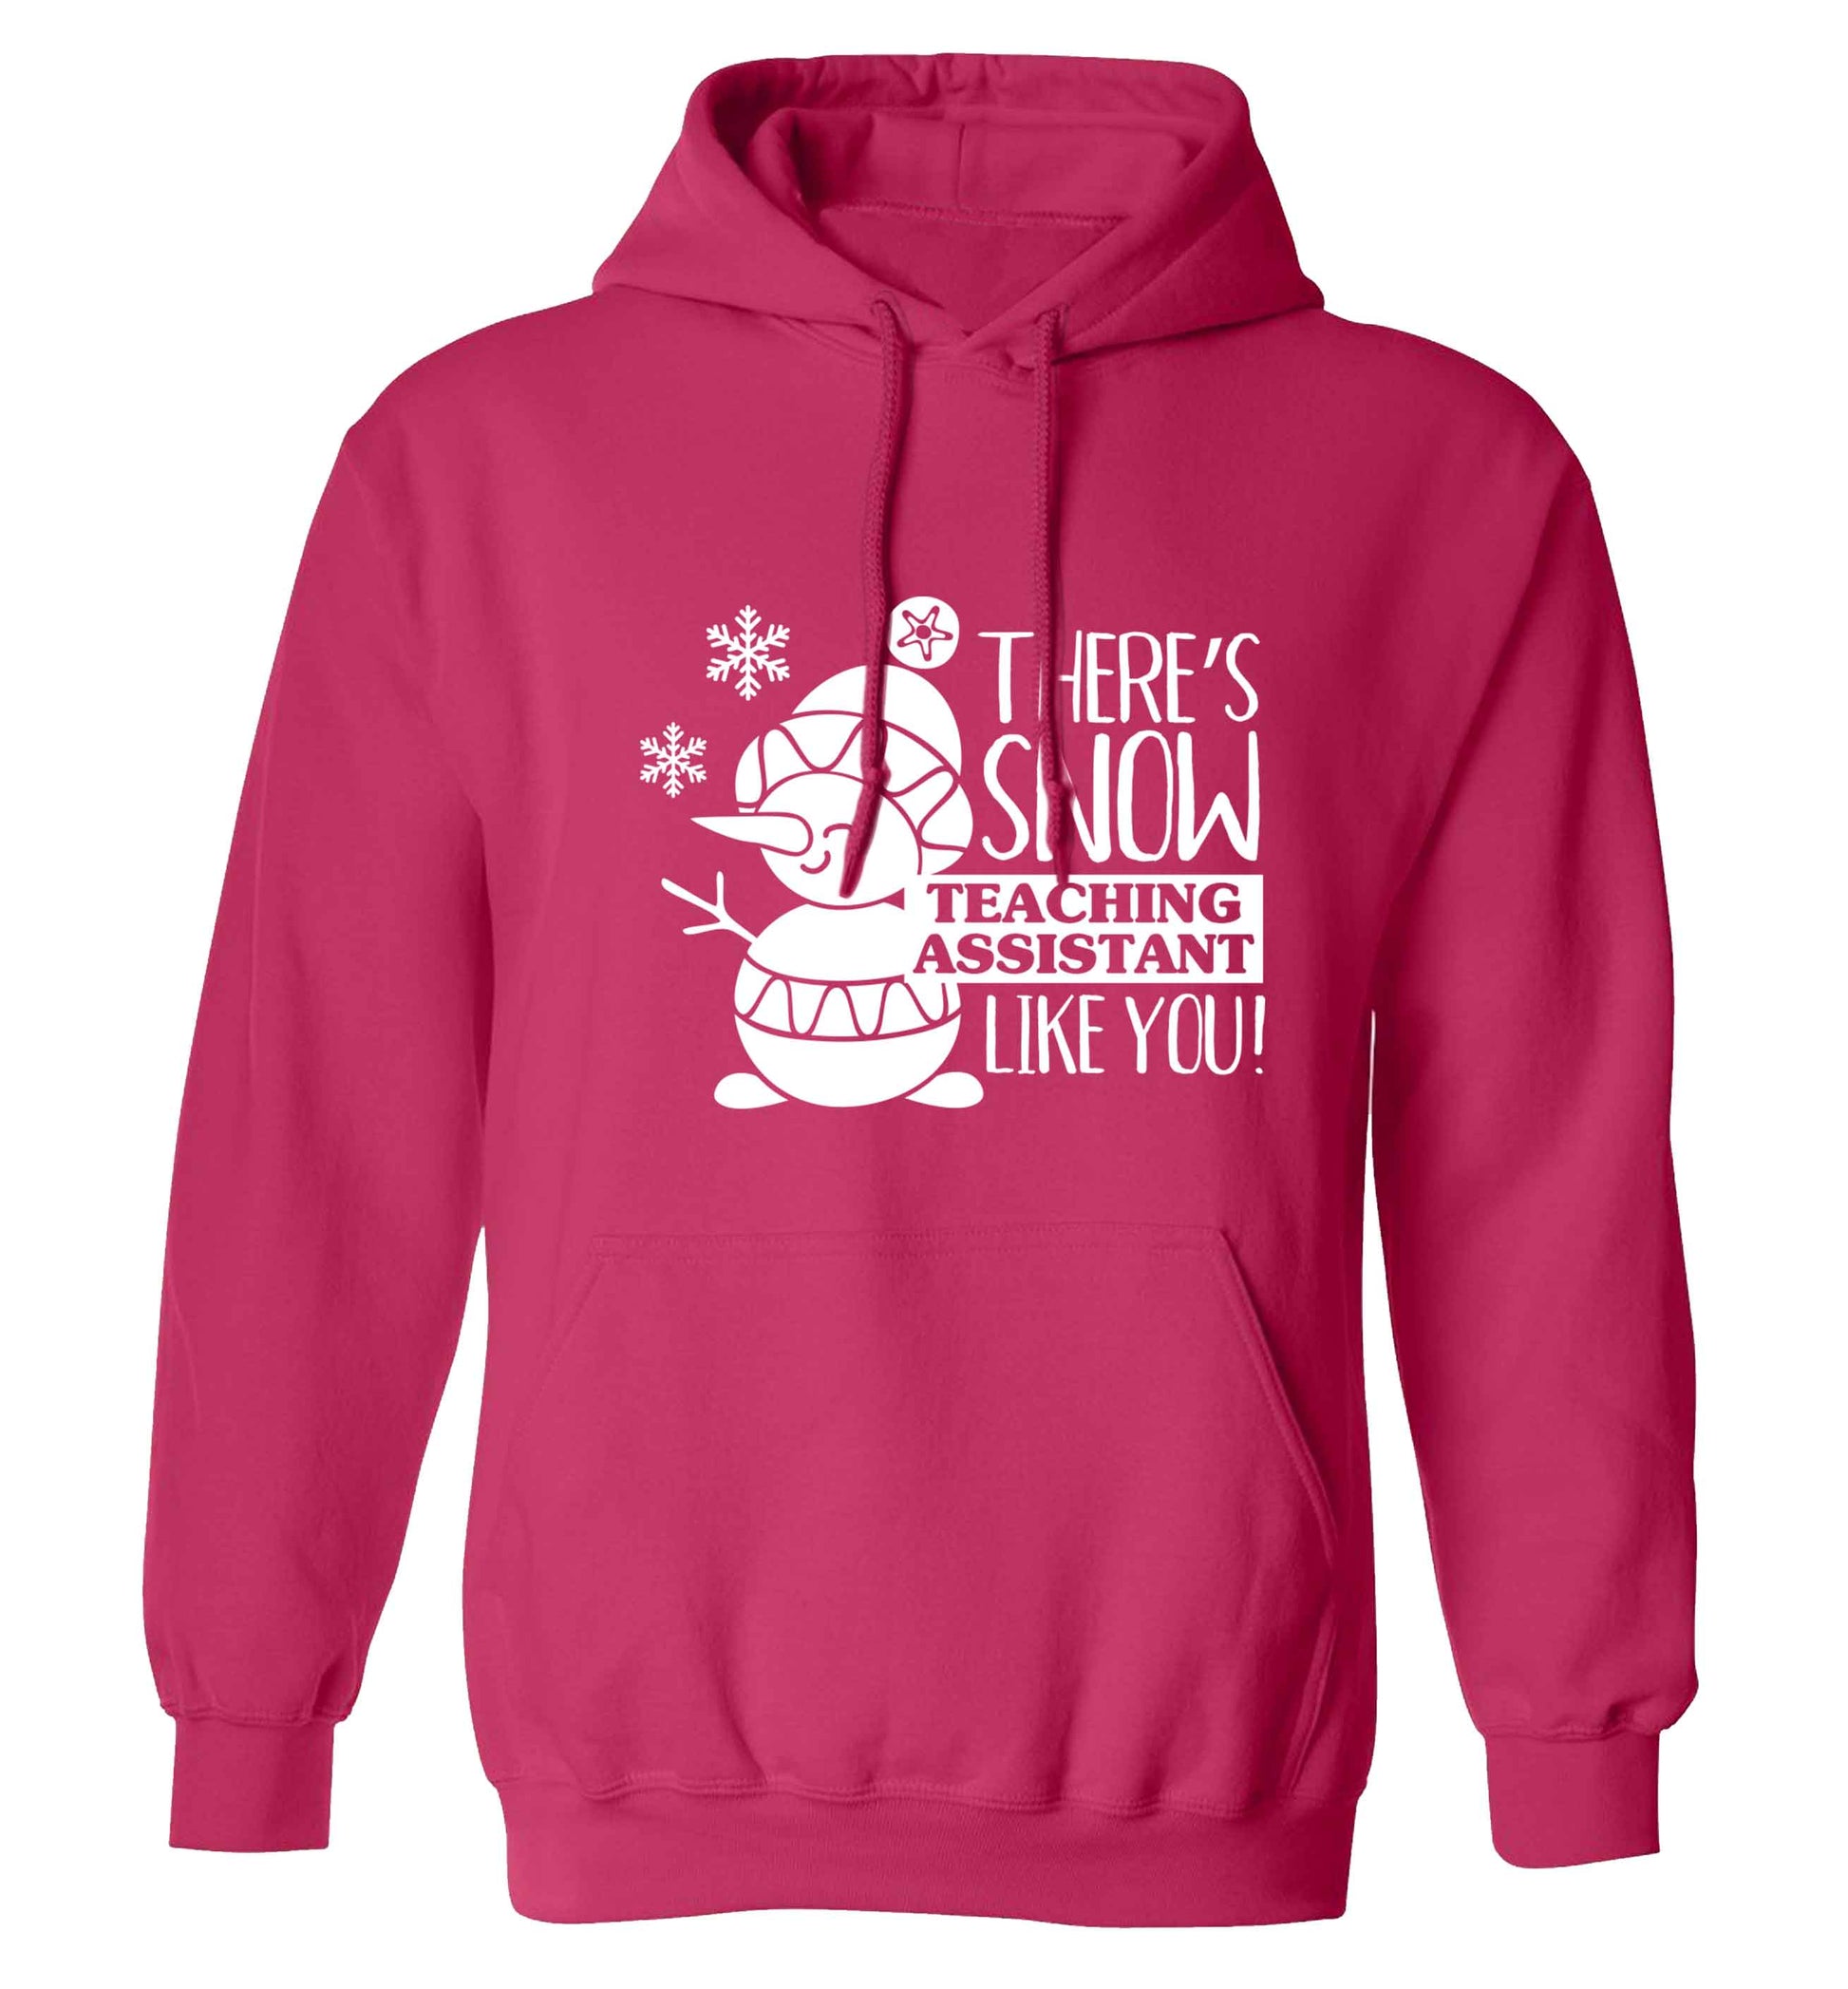 There's snow teaching assistant like you adults unisex pink hoodie 2XL